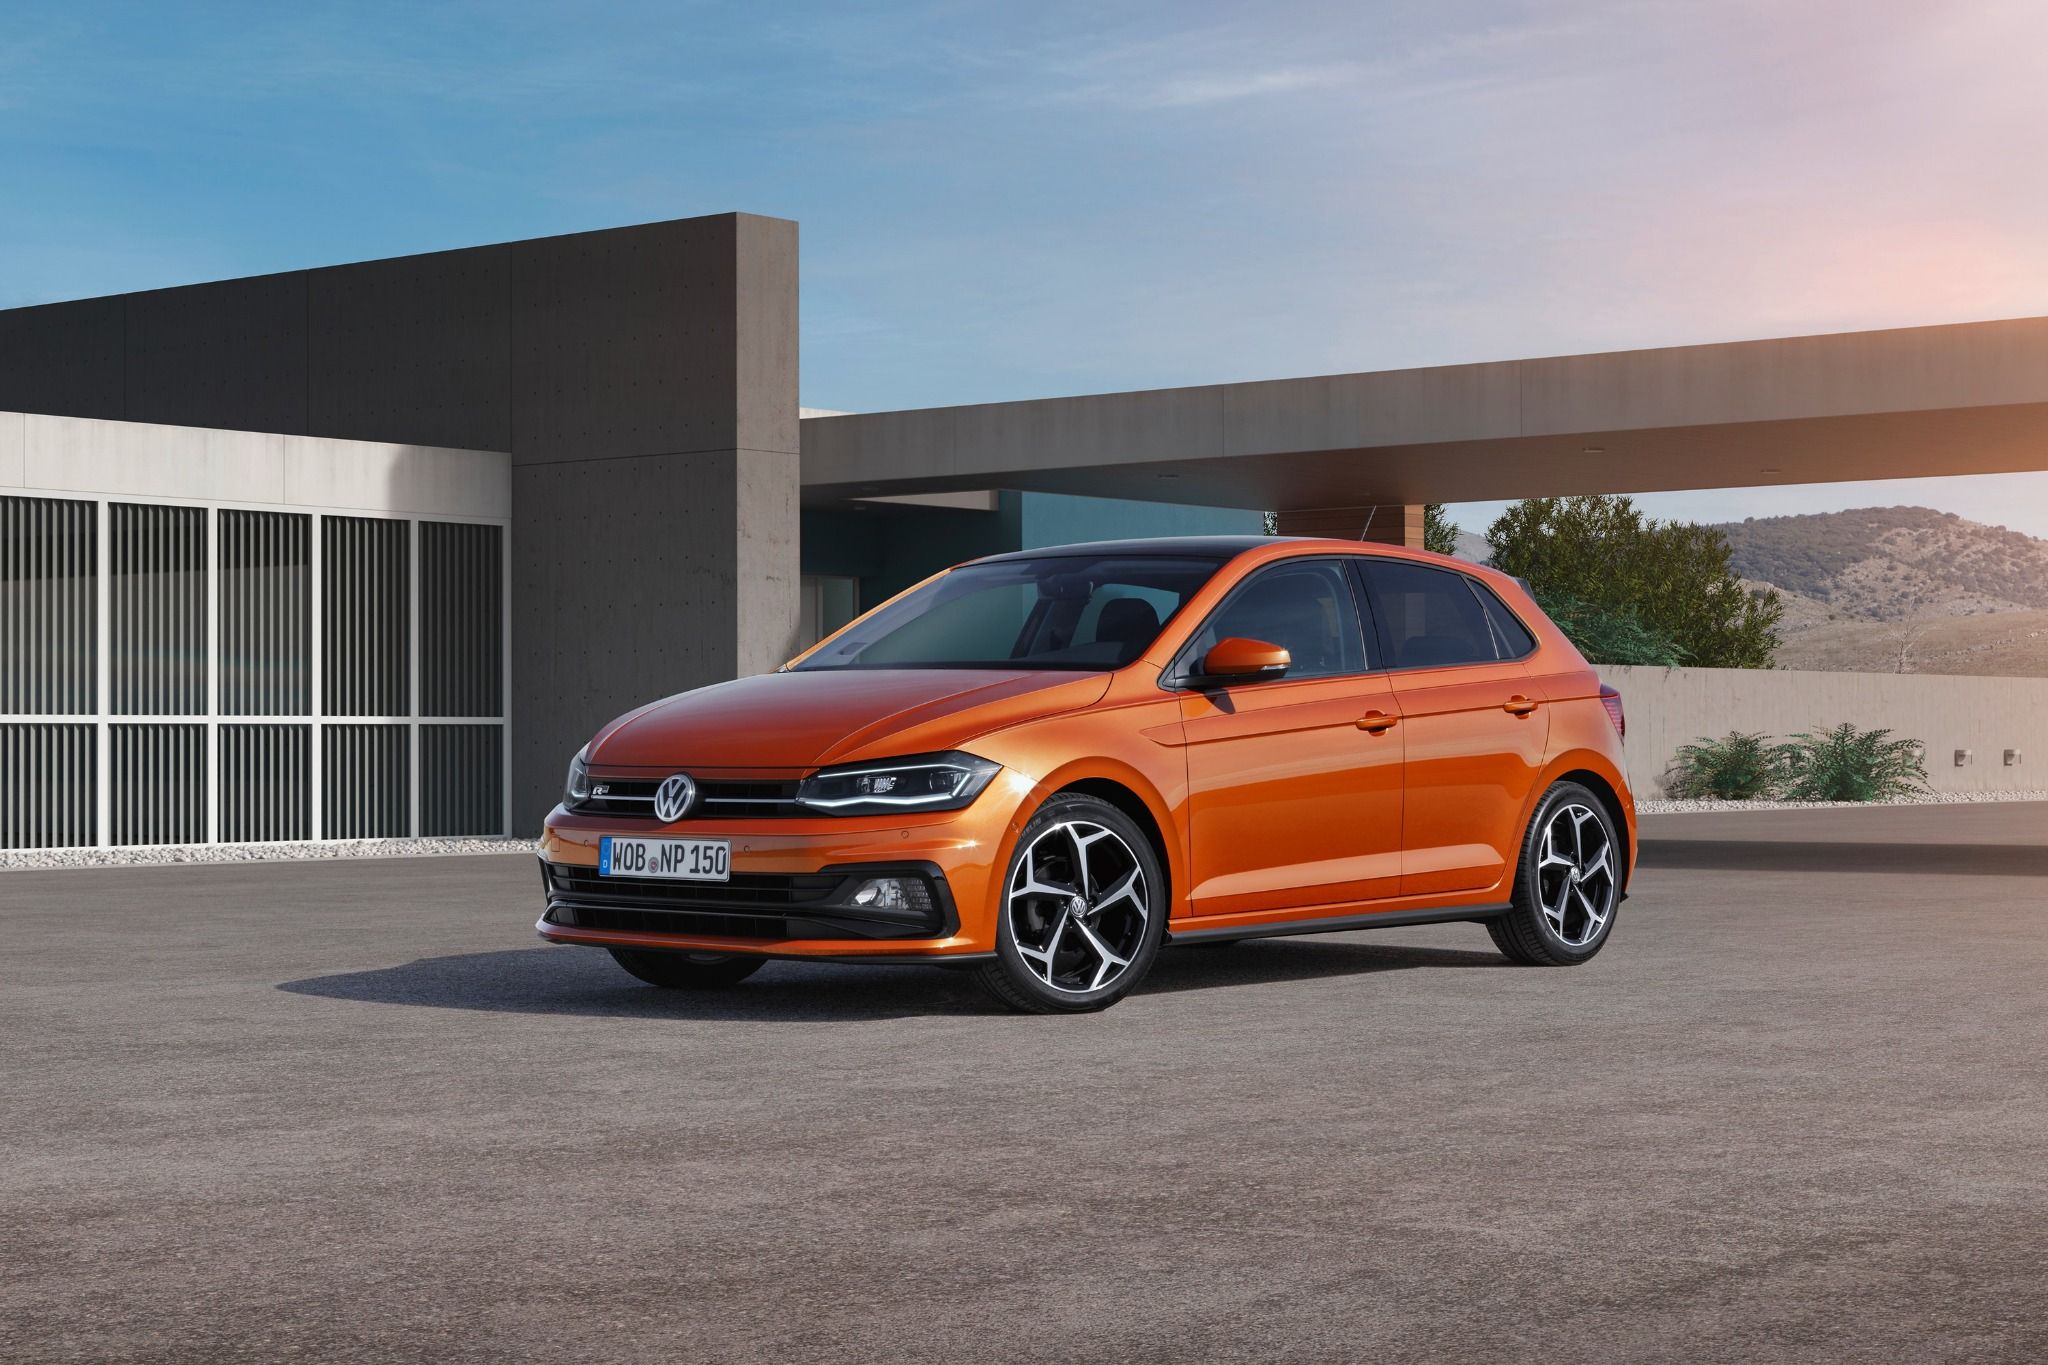 Front view of an orange VW Polo R